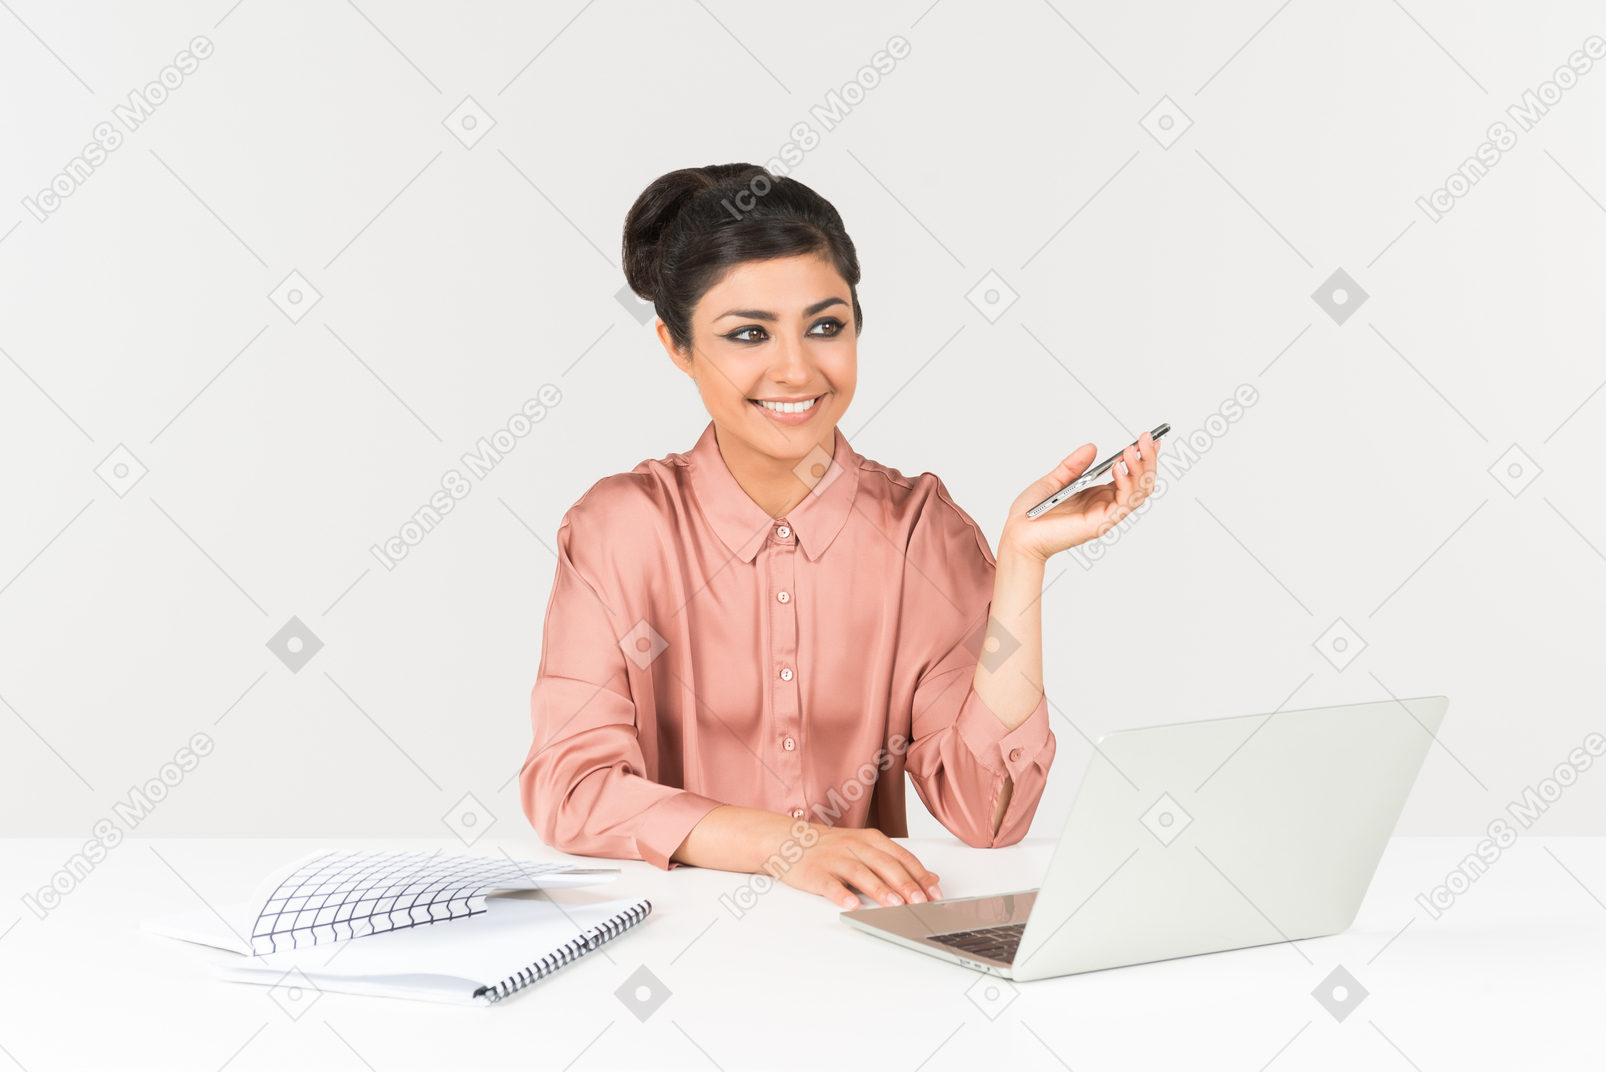 Smiling young indian woman holding phone and working on laptop